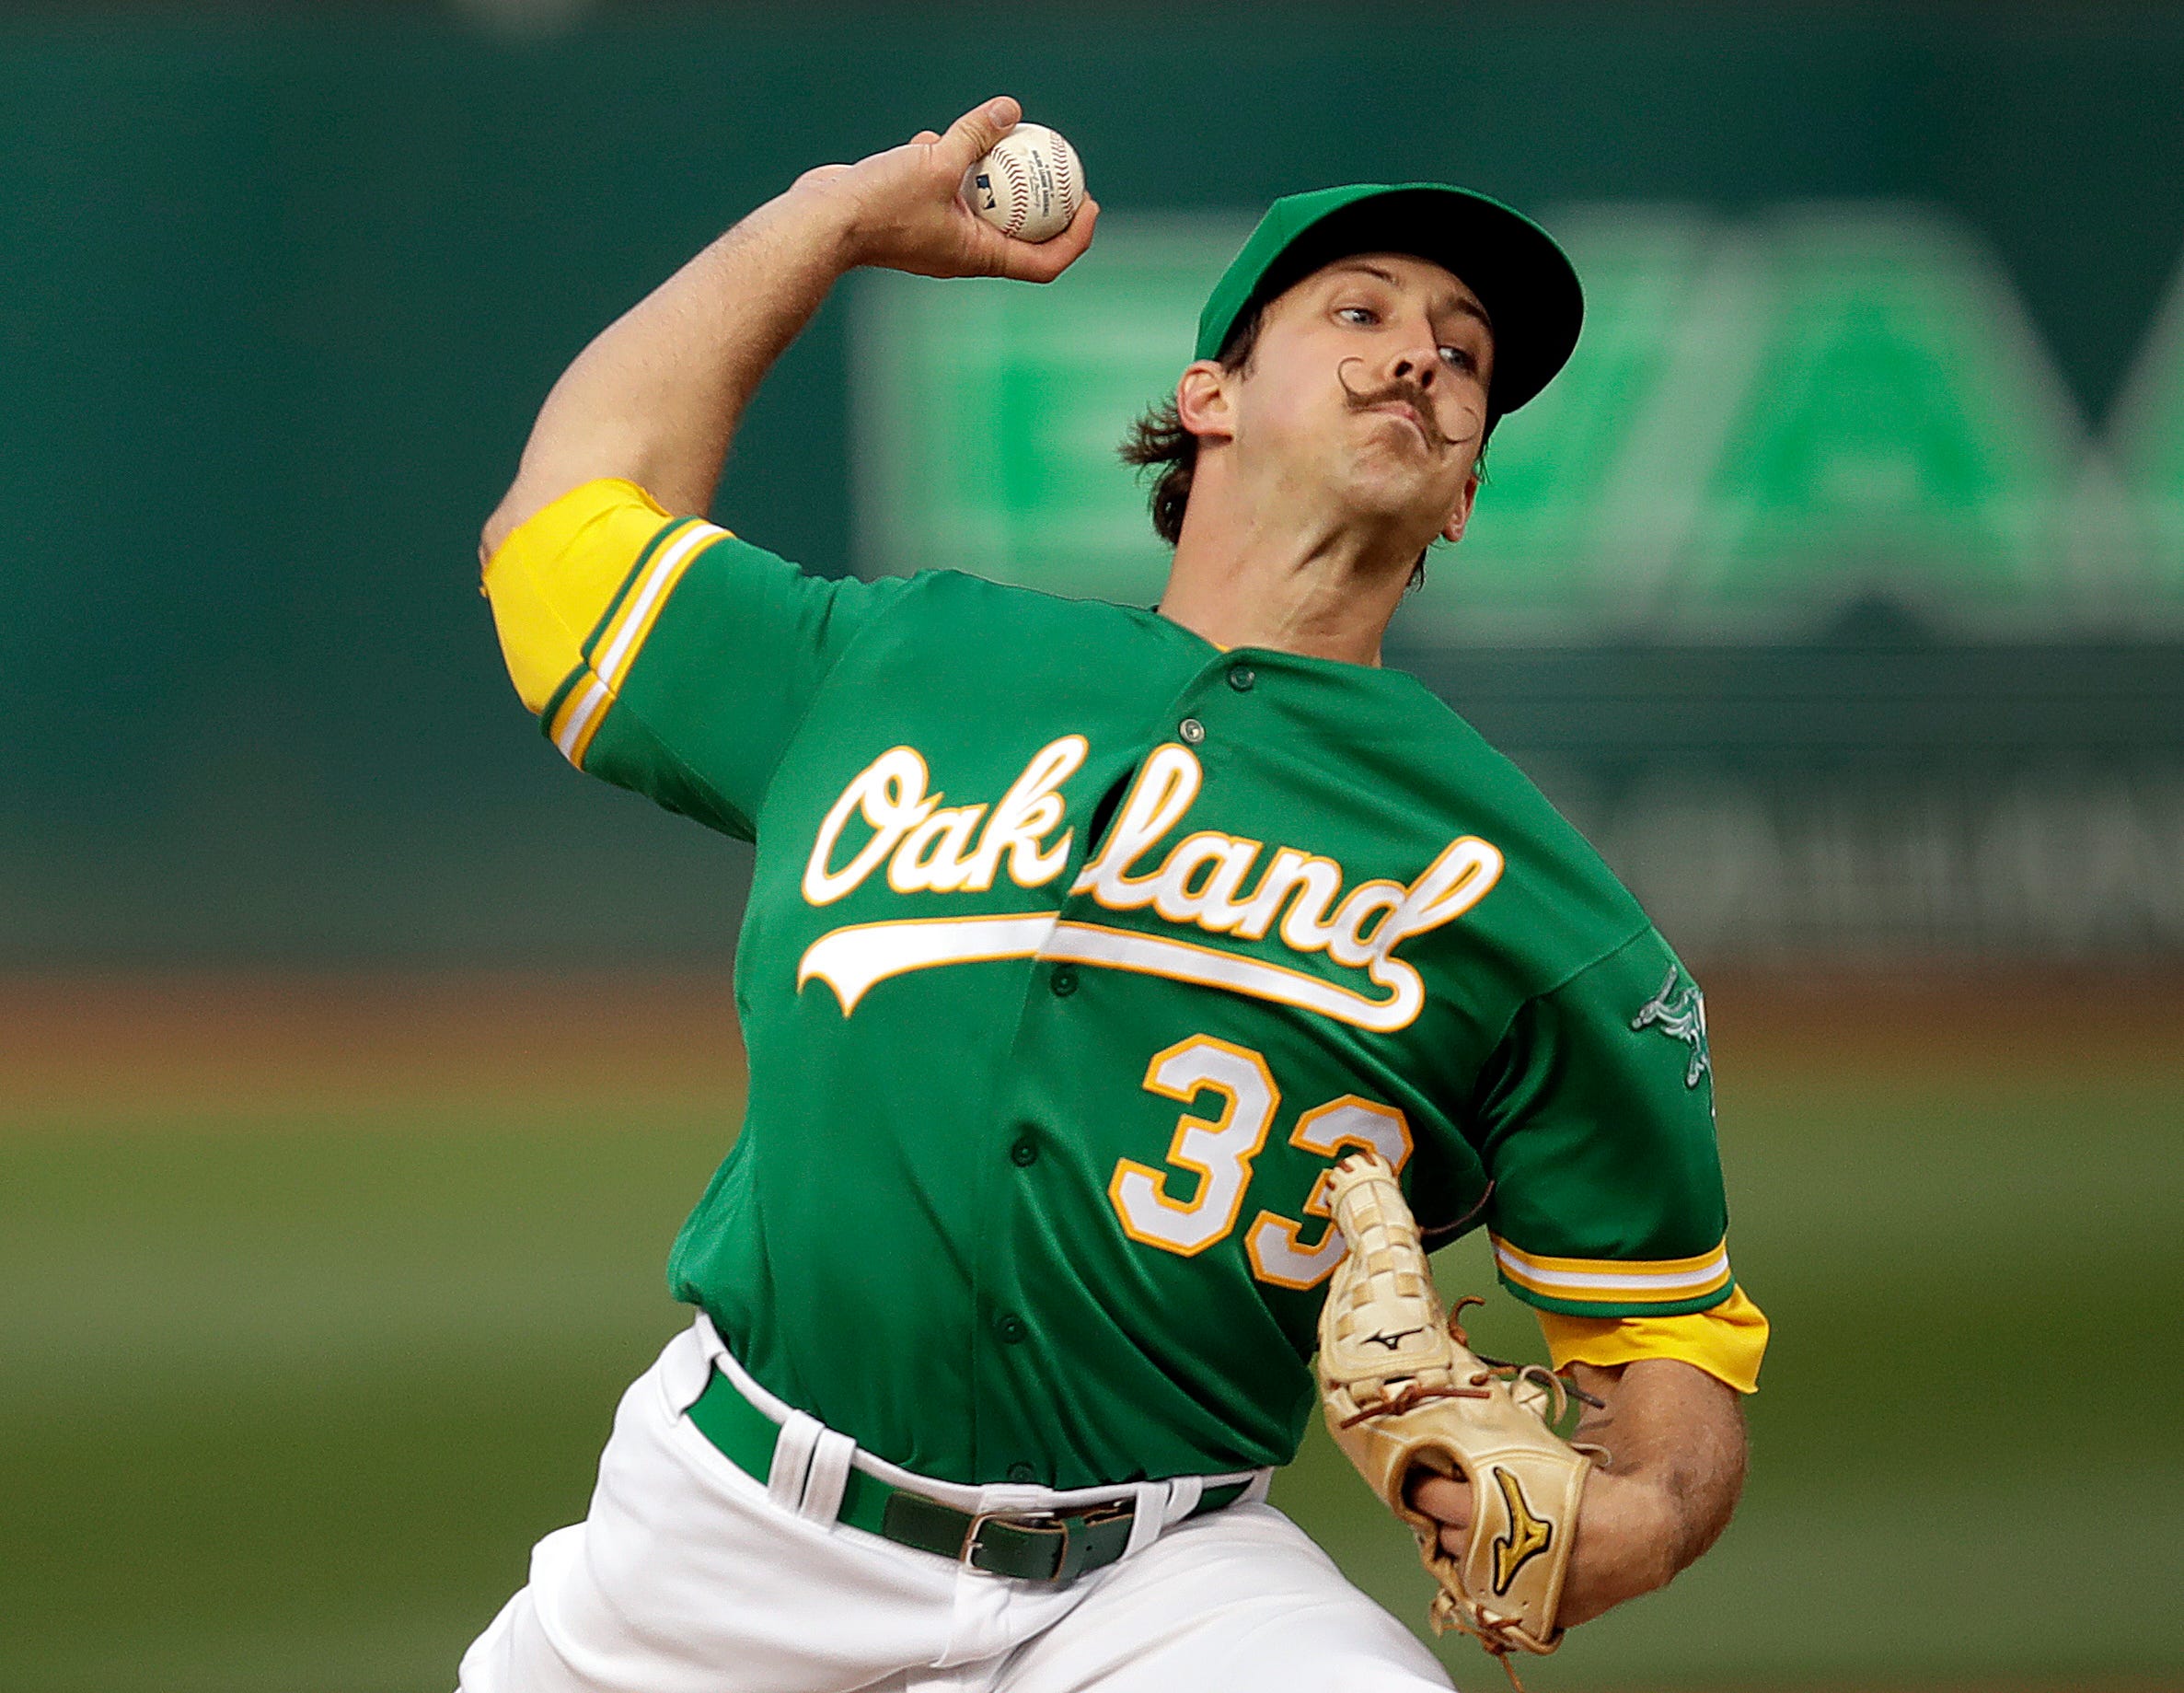 Olson, Canha go back-to-back in A's 6-2 win over Mariners